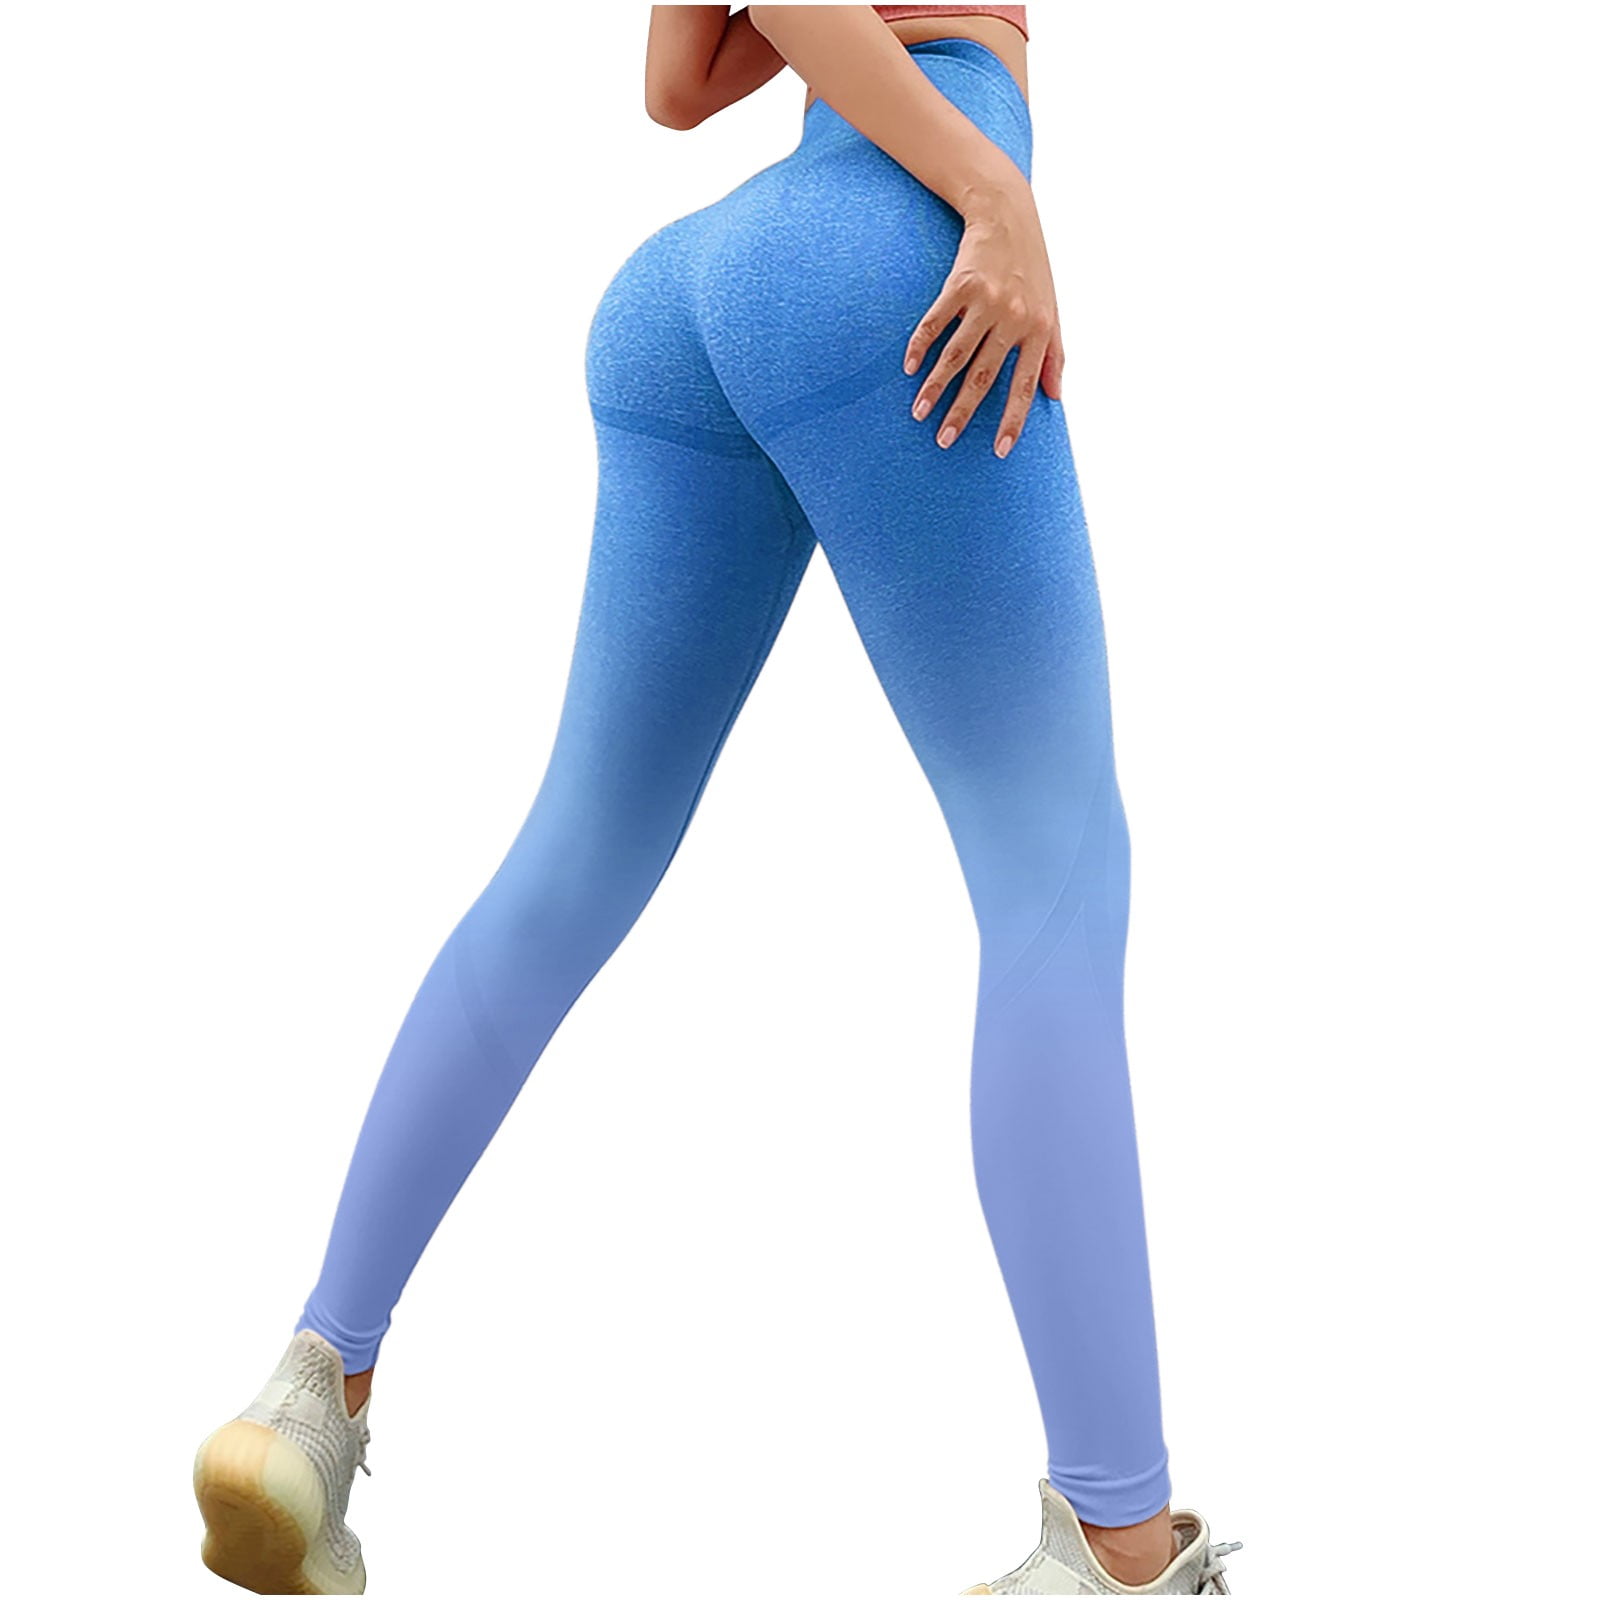 Seamless High Waist Seamless Yoga Tights For Women Compression Leggings For  Fitness, Workout, Gym Tight And Sexy Sportswear H1221 From Mengyang10,  $8.55